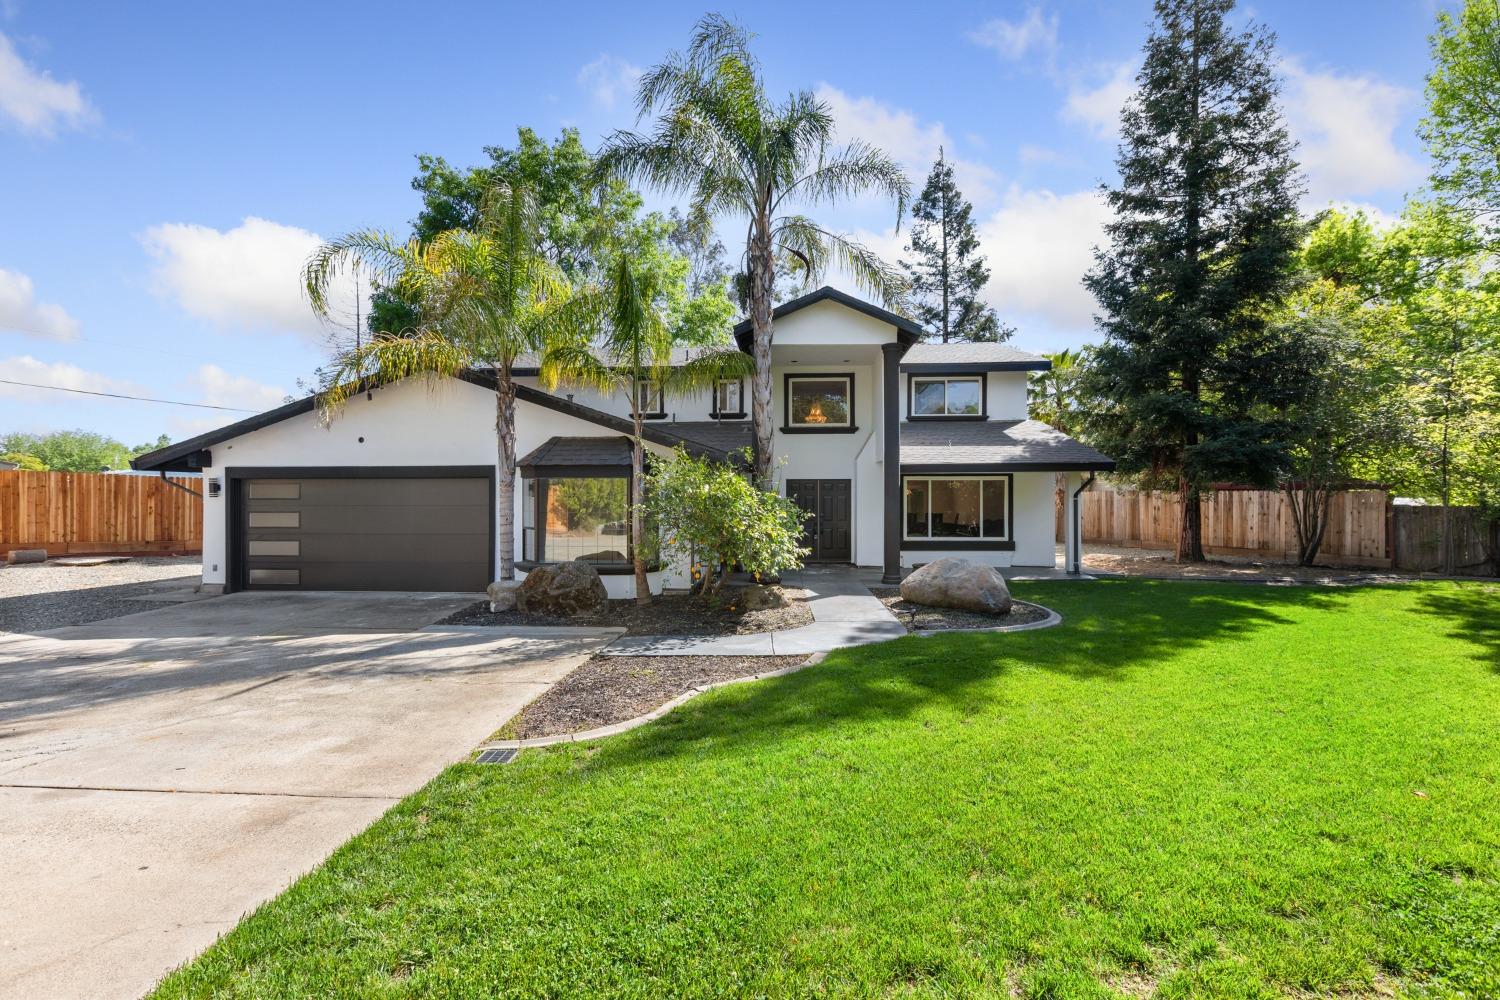 Photo of 8117 Glen Canyon Ct in Citrus Heights, CA